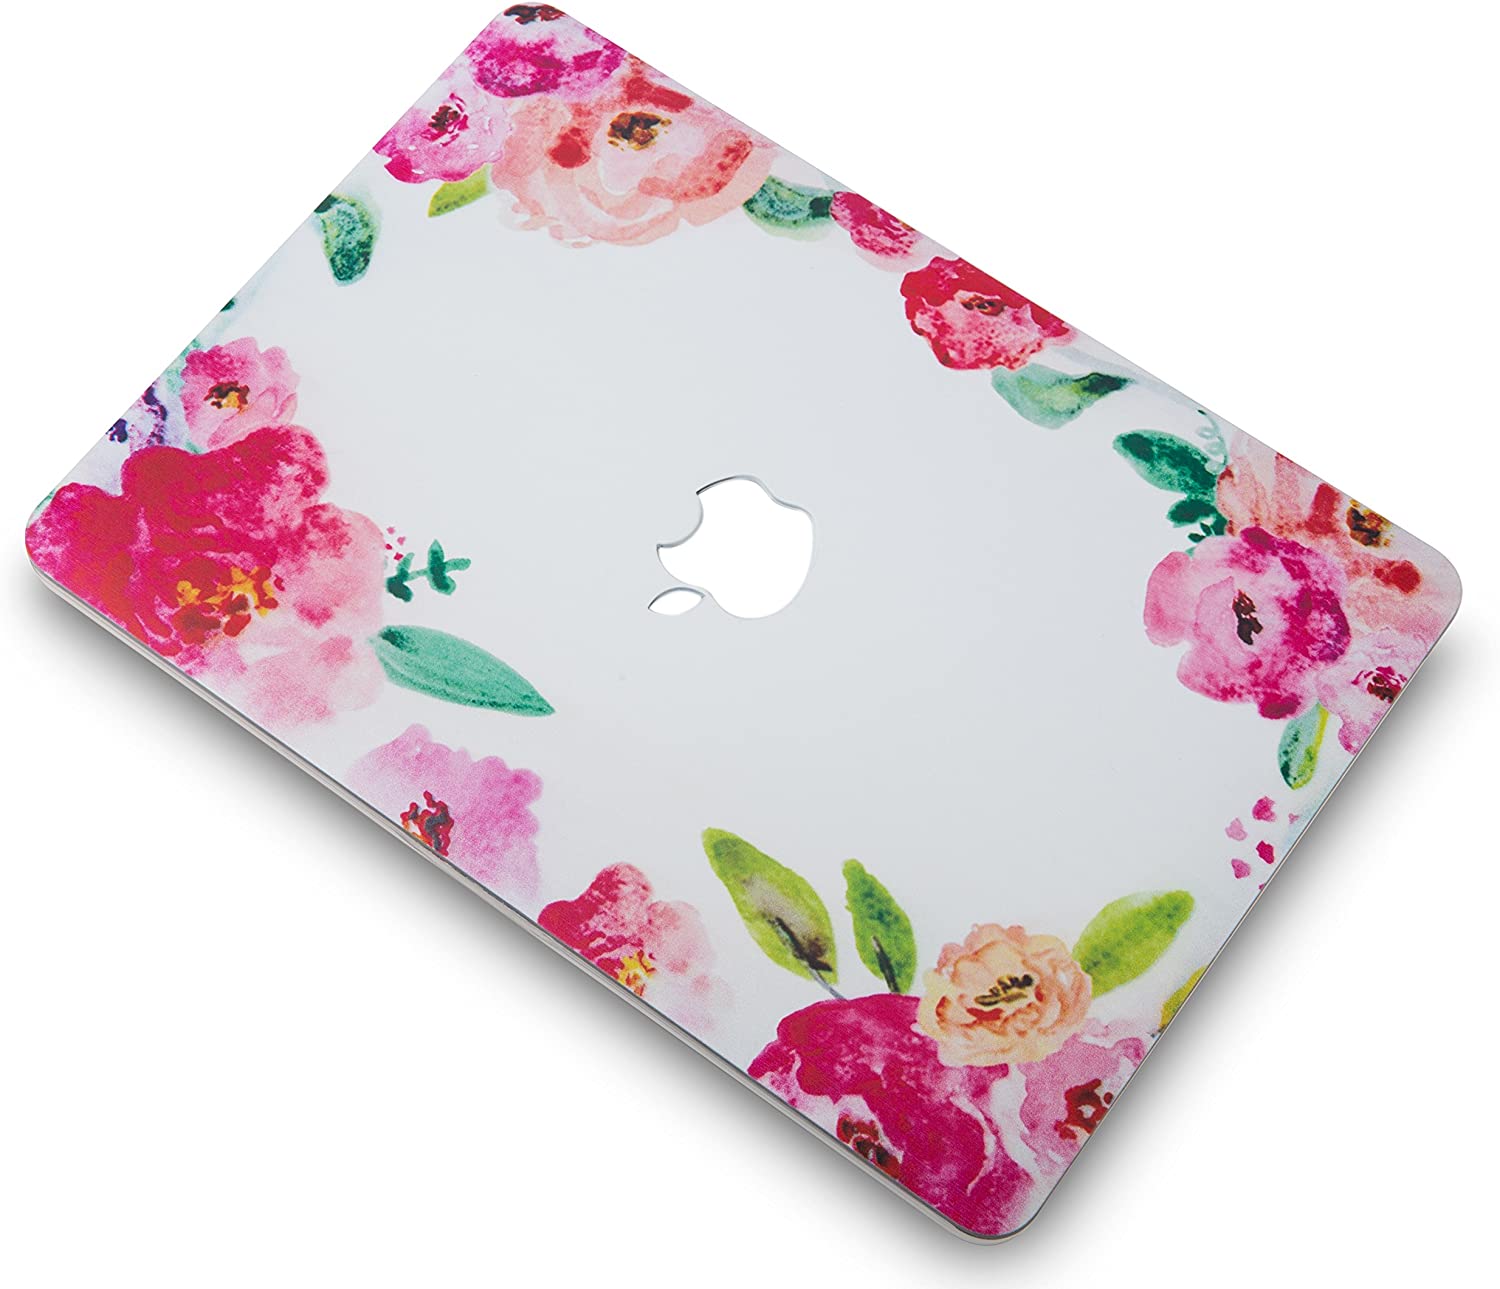 Flower -  MacBook Air 13 inch Case 2009 - 2017 Release. Hard case only - e4cents